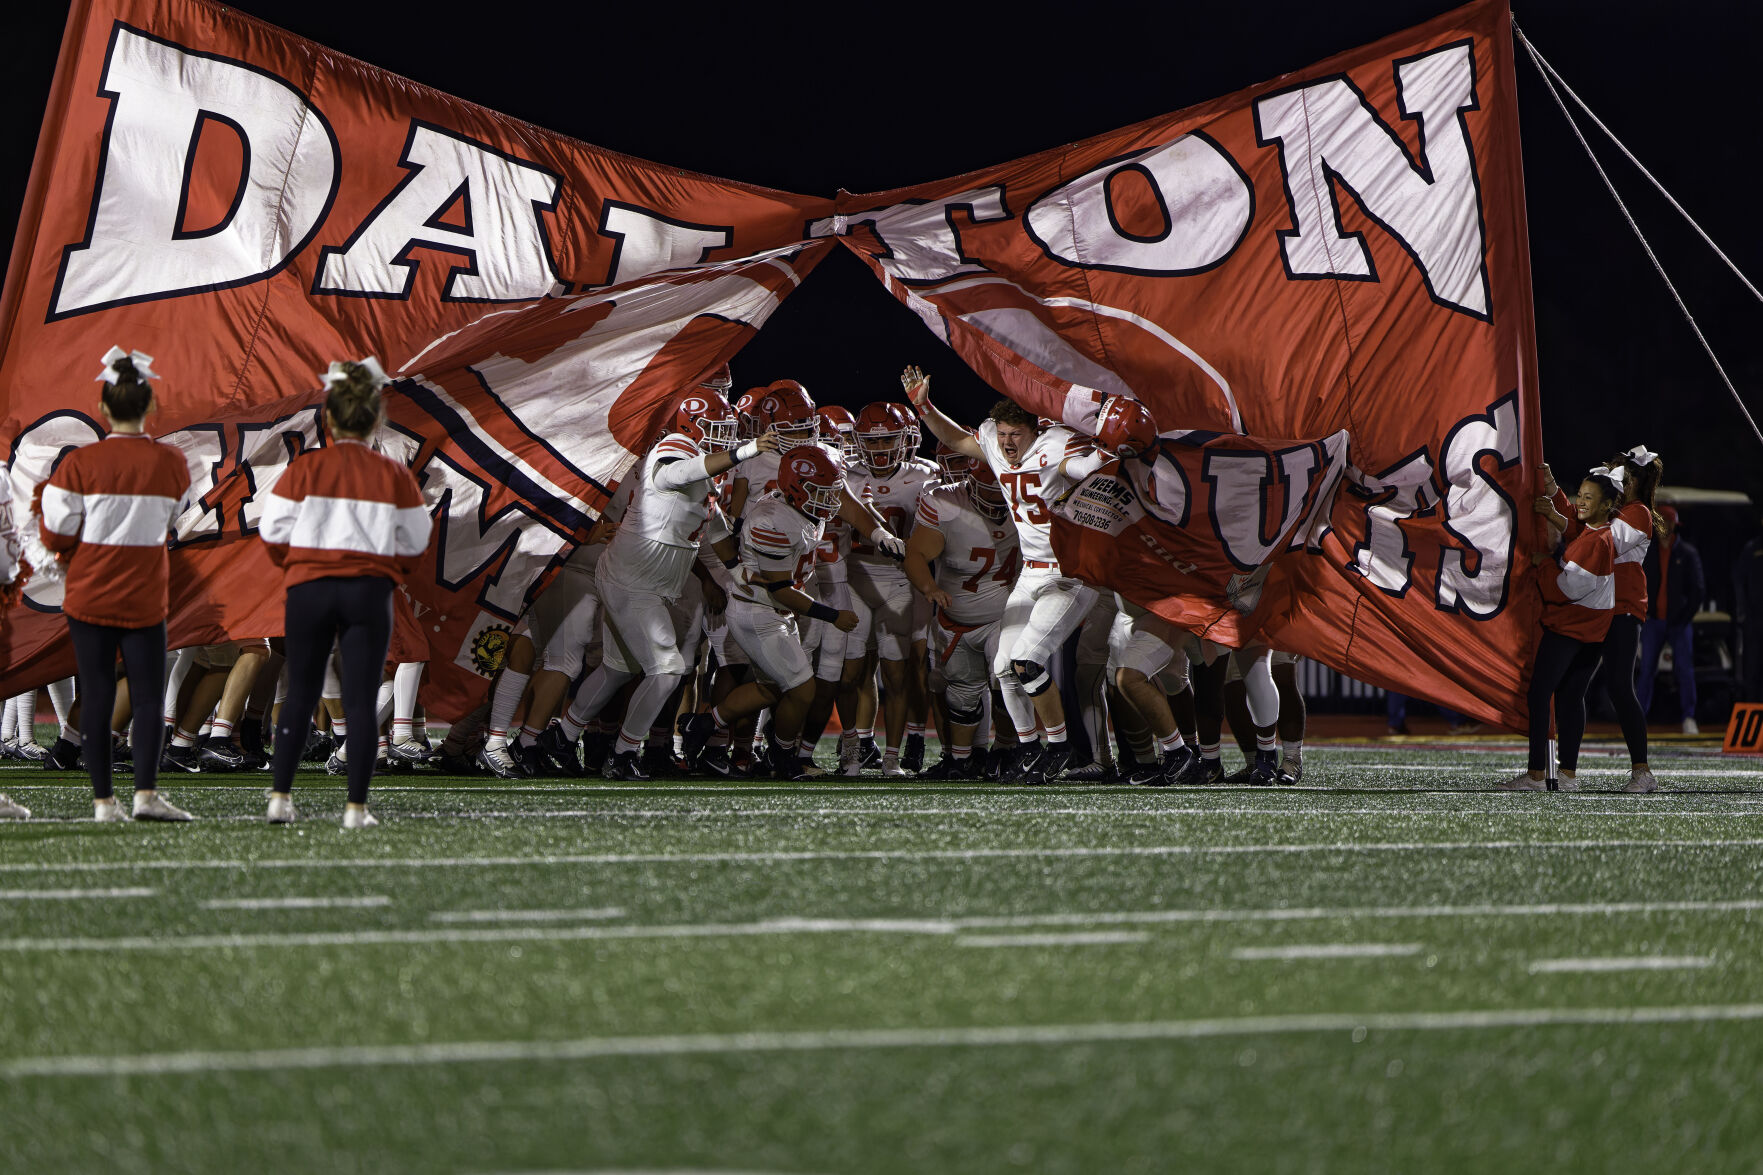 Dalton High School Falters in 5A Playoffs, Bubba Tanner Shines in Defeat